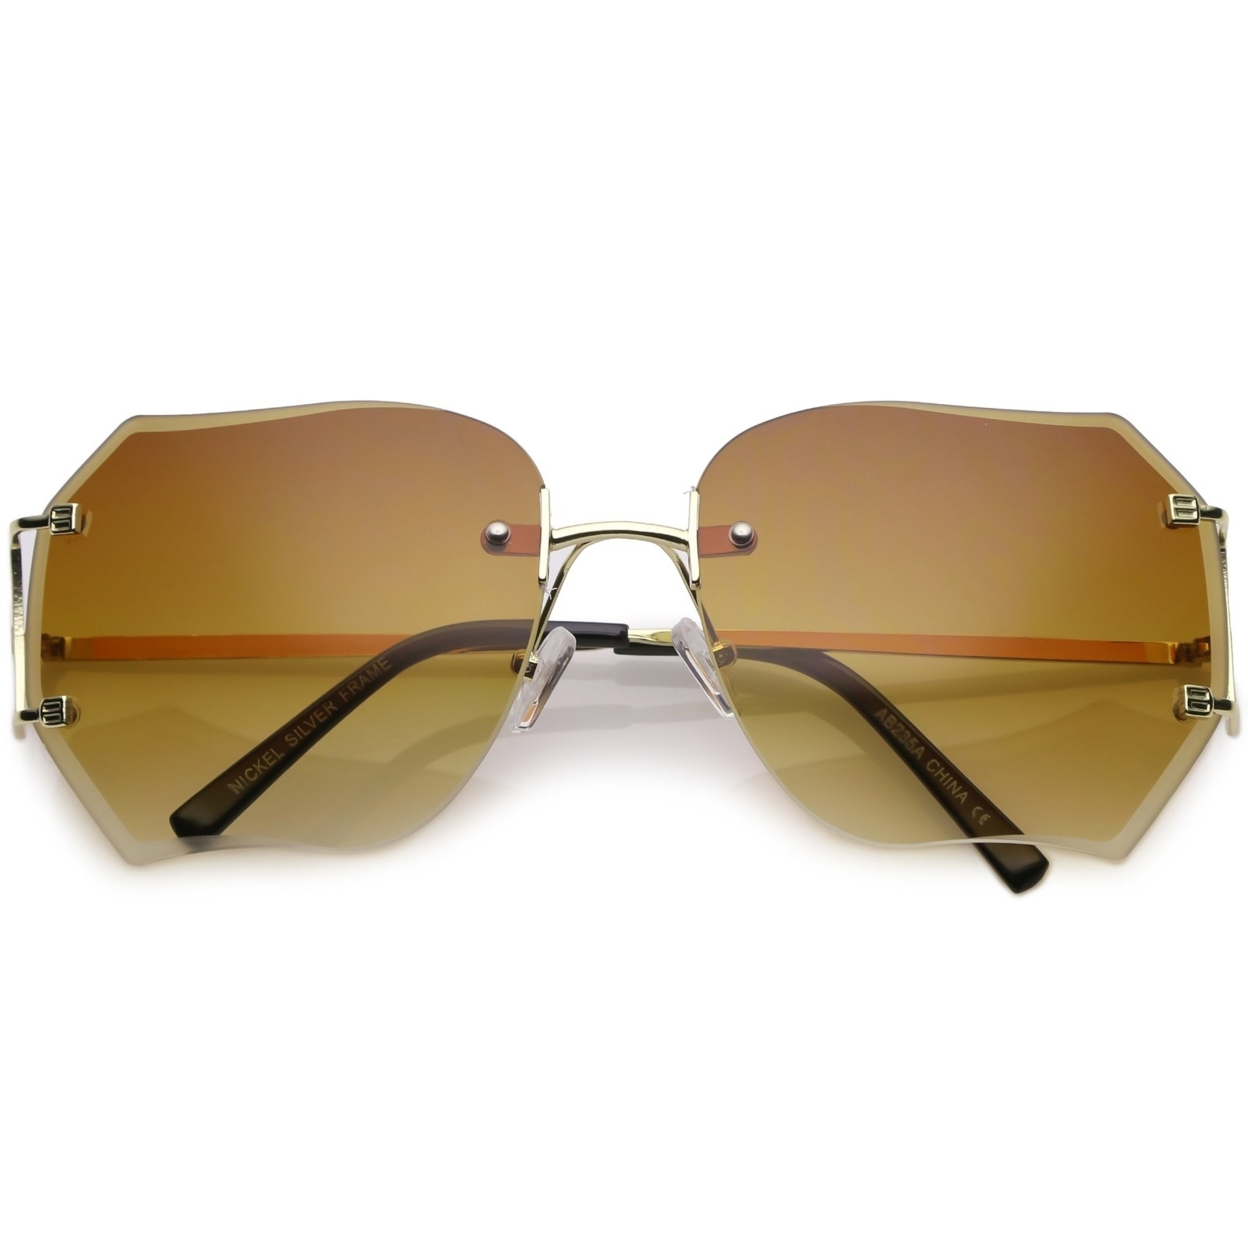 Oversize Rimless Square Sunglasses Slim Metal Arms Beveled Gradient Lens 61mm - Gold / Brown Pink